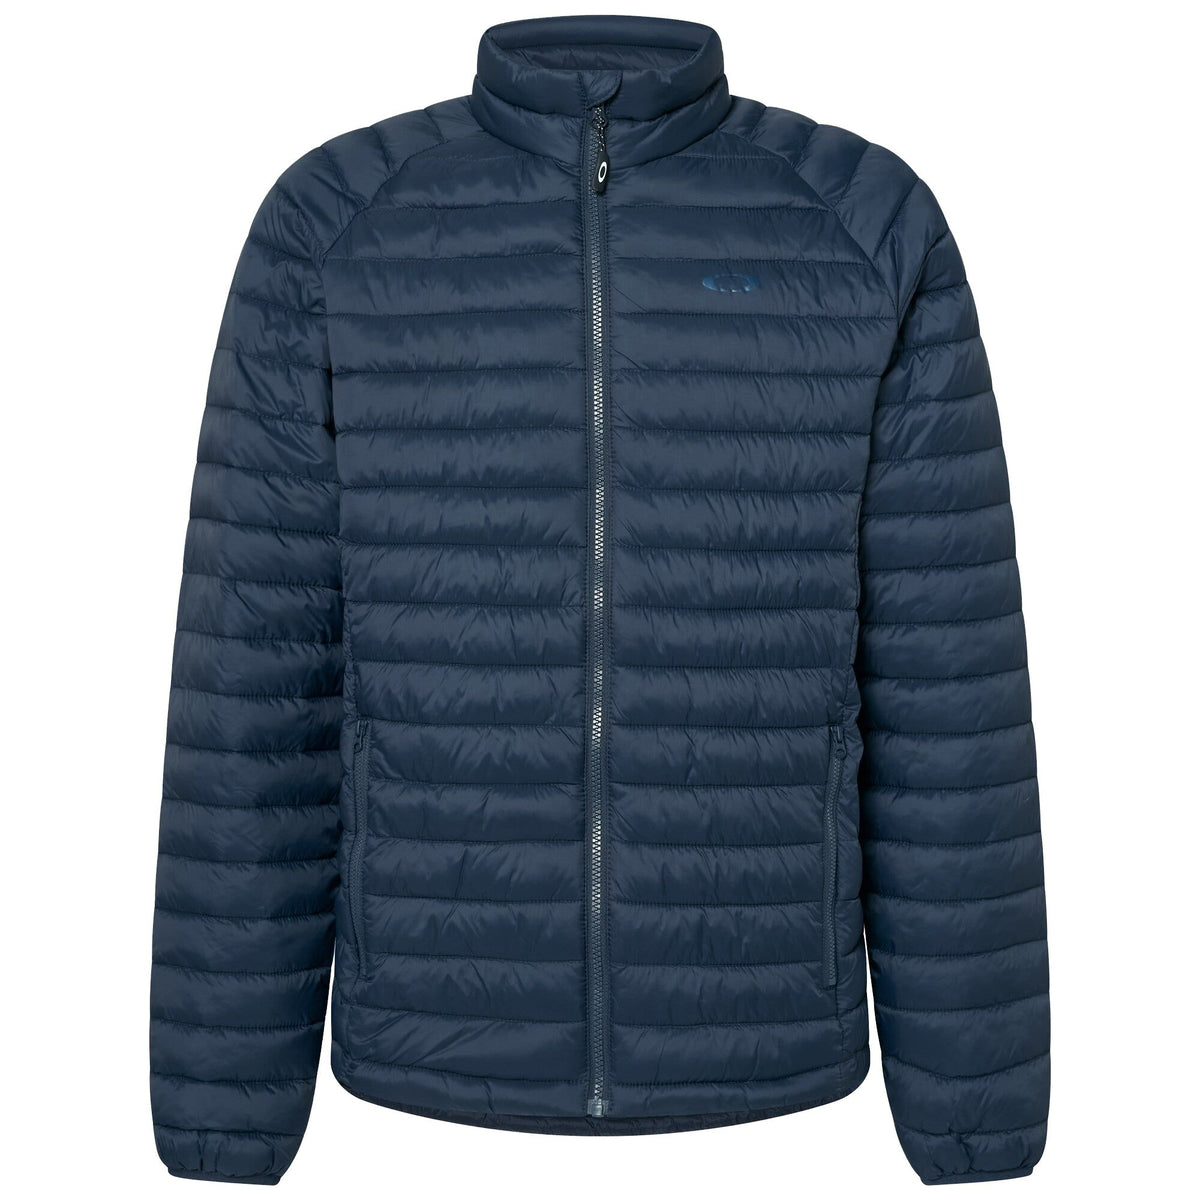 Oakley Men's Omni Thermal Jacket - Ourland Outdoor